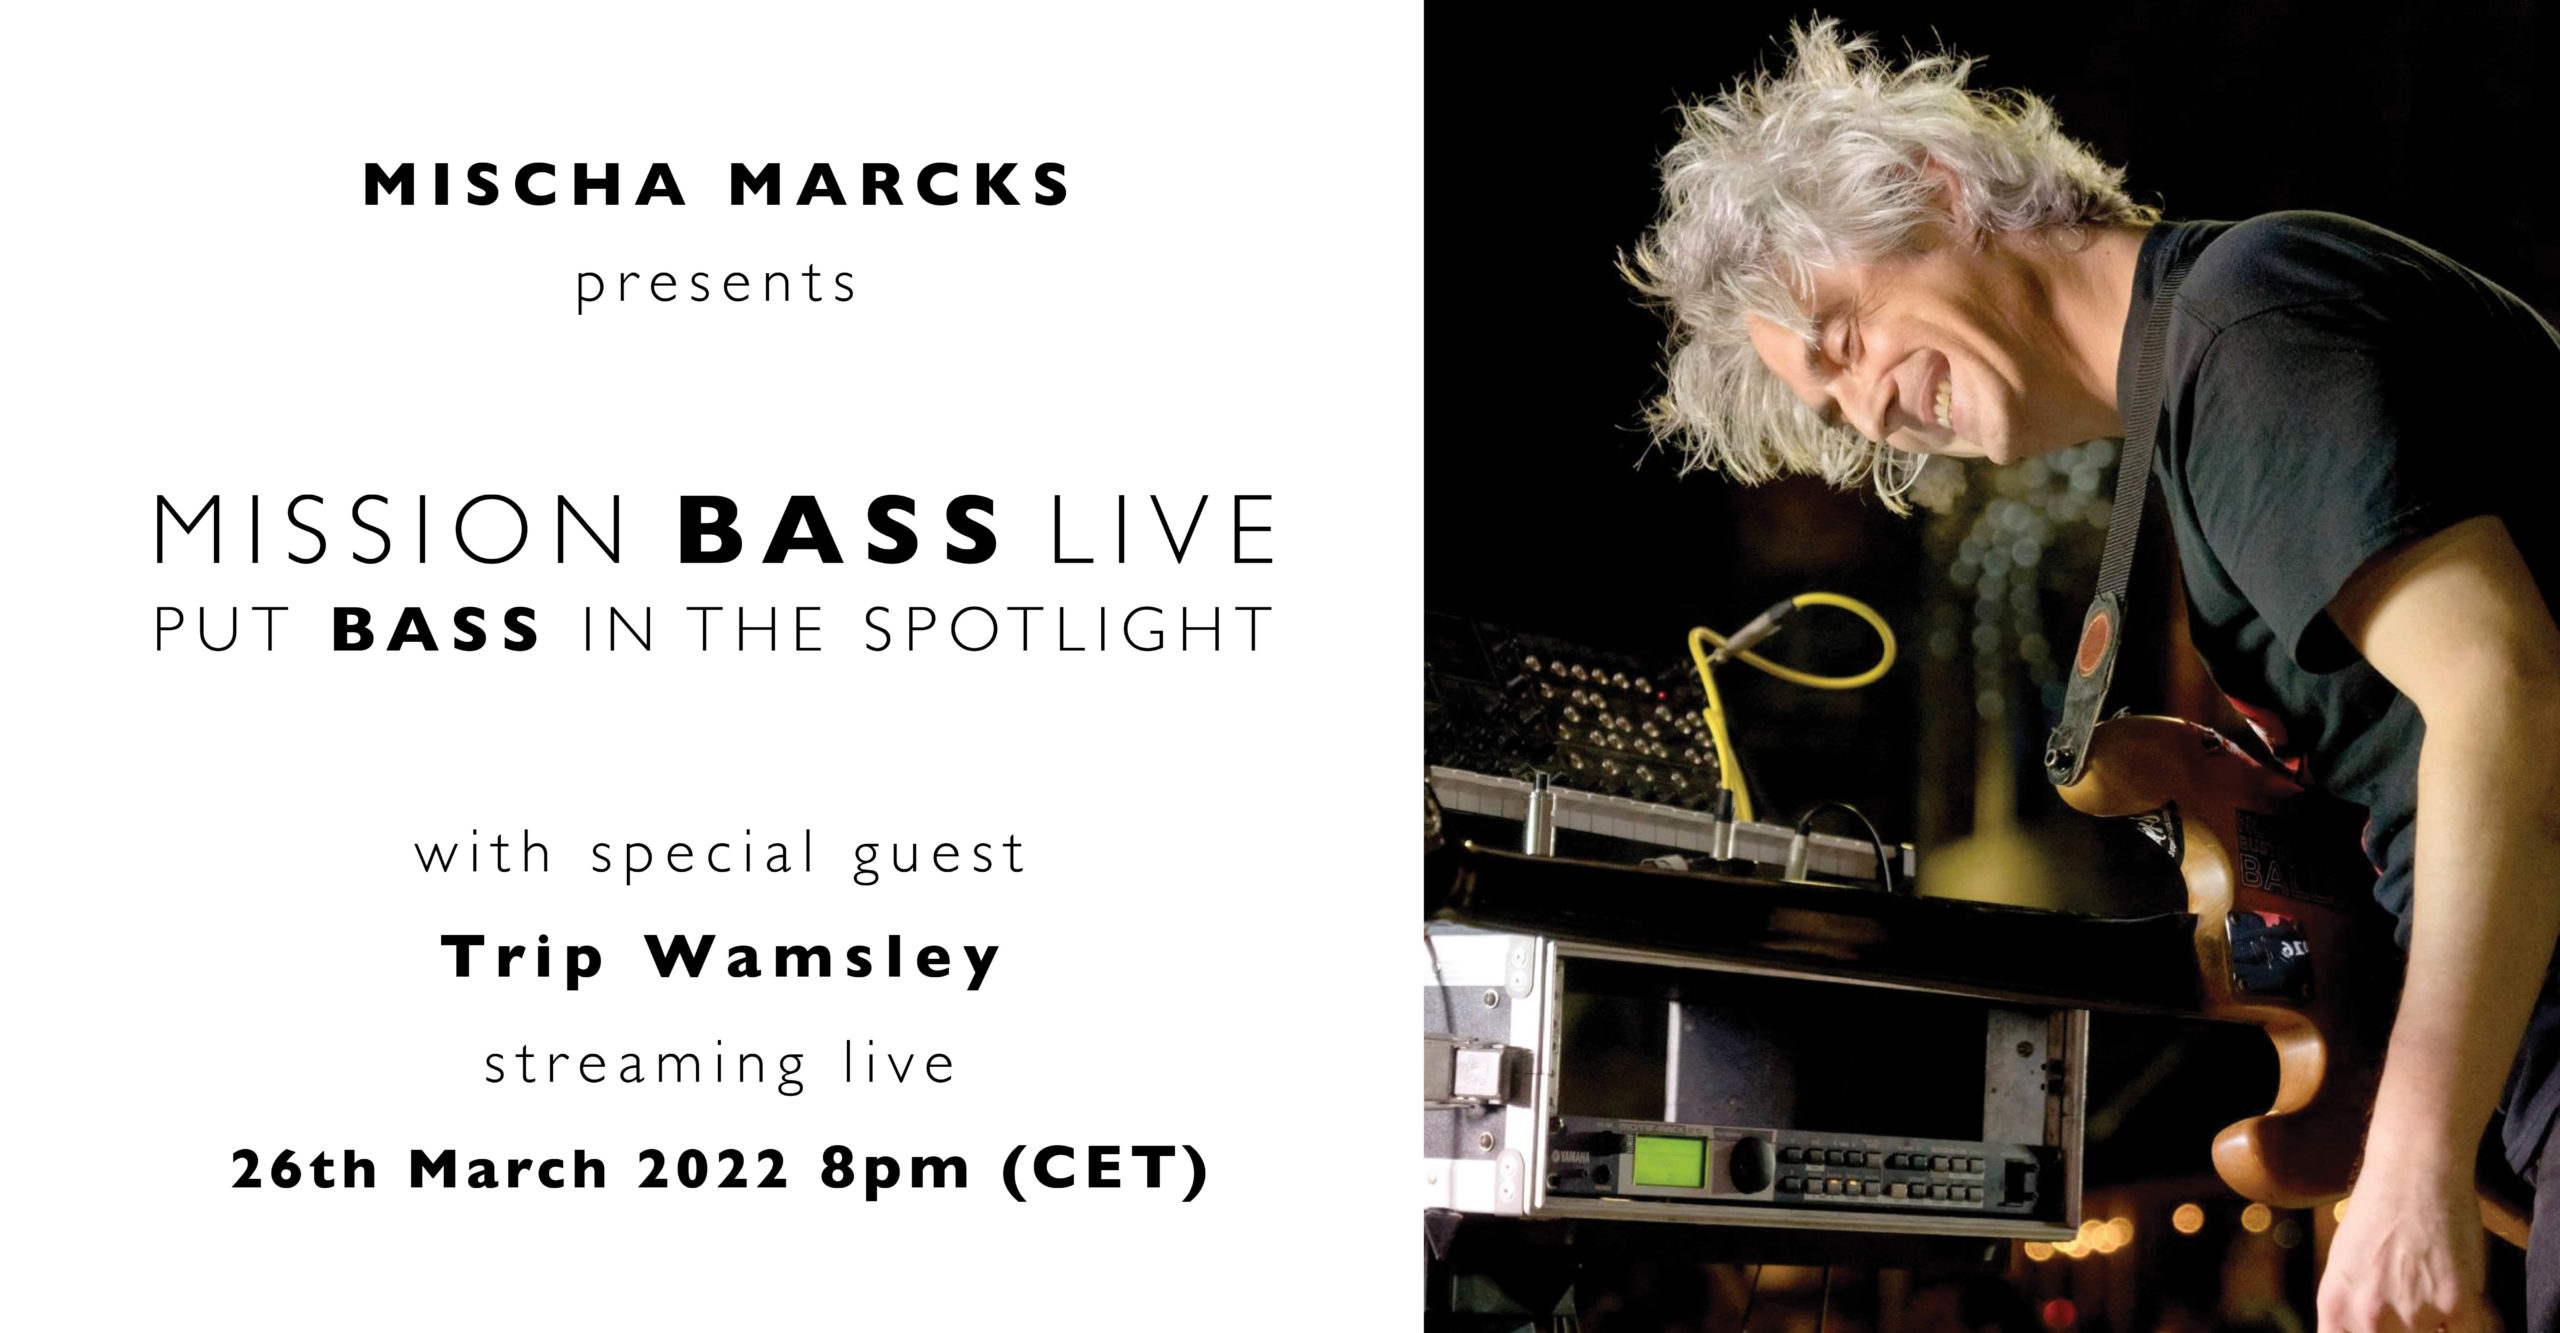 Mission bass live Trip Wamsley solo bass education live streaming